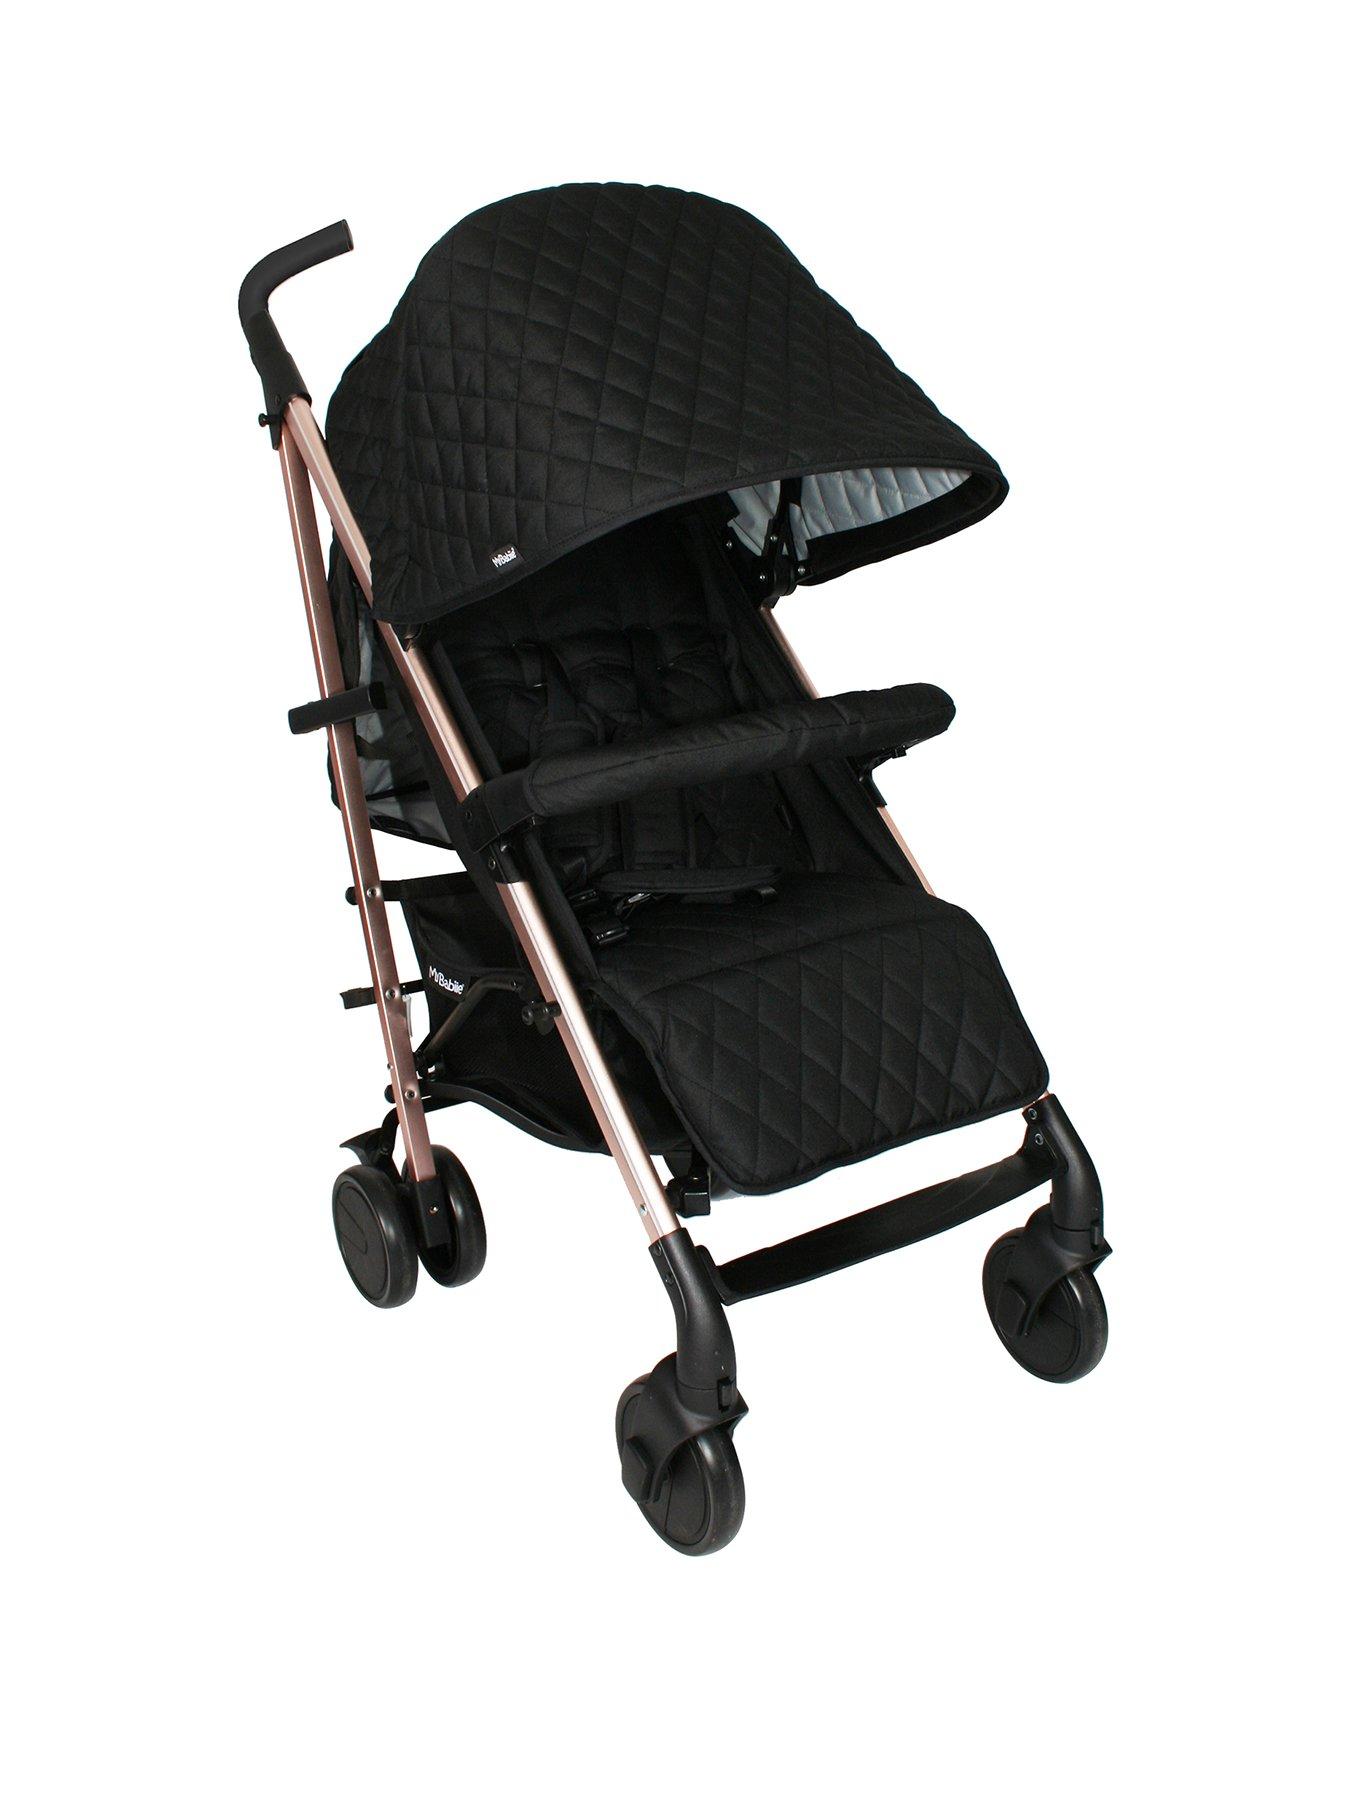 buggies and strollers uk